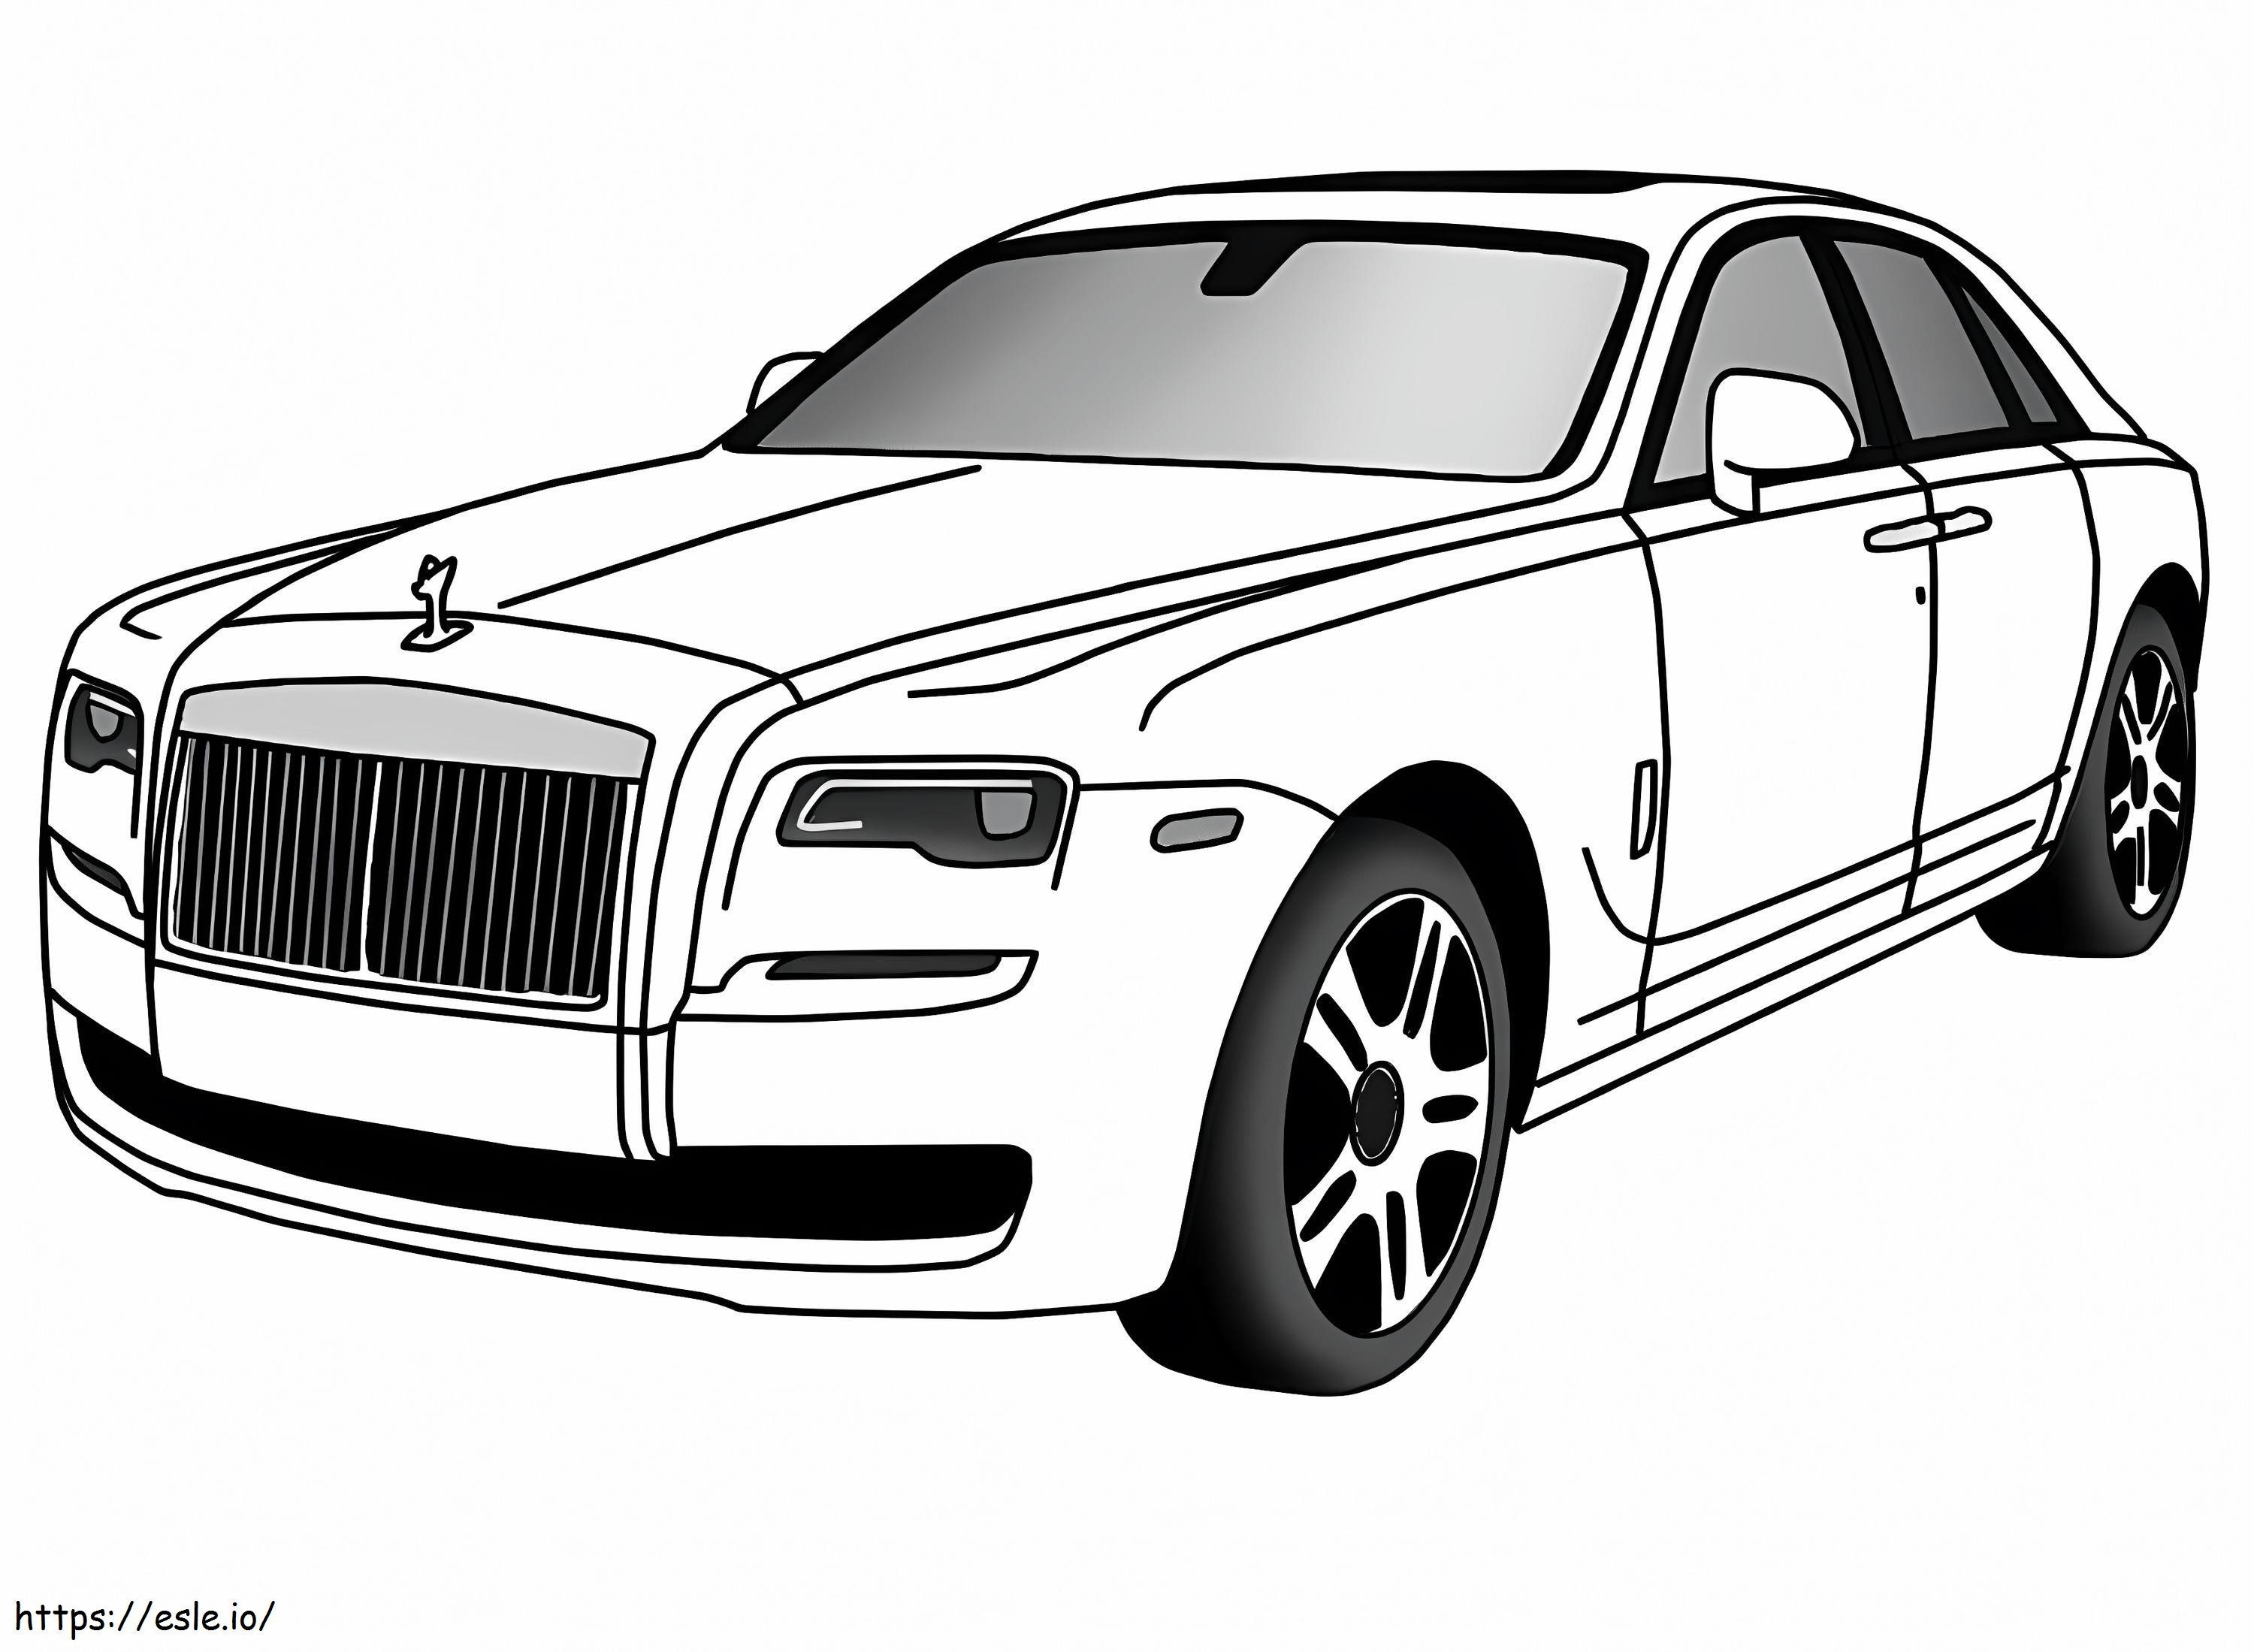 Rolls Royce Ghost coloring page